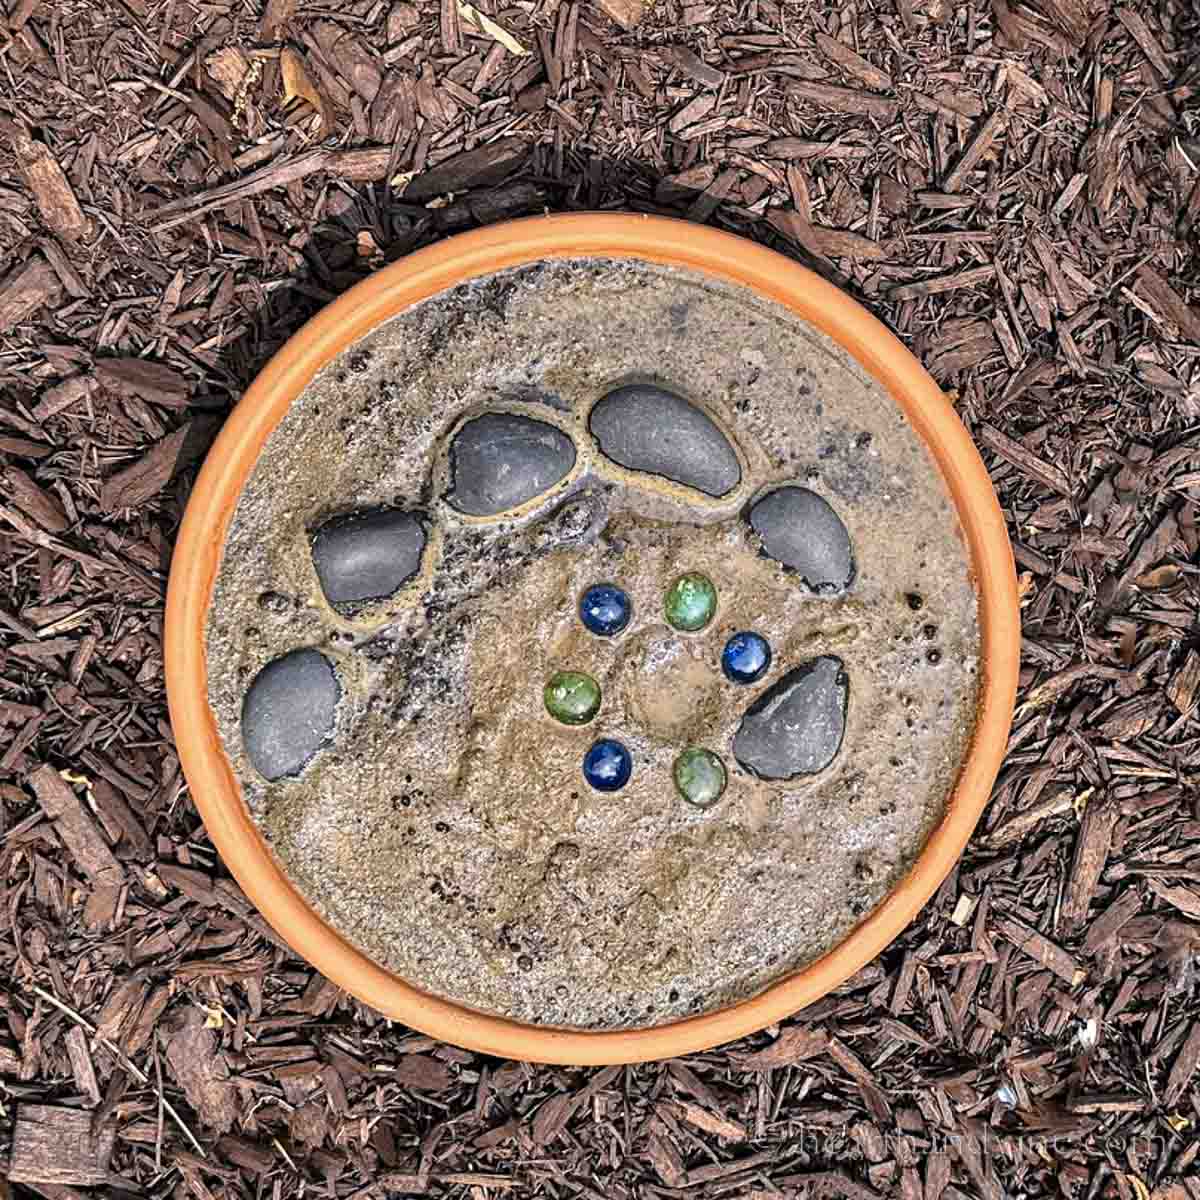 Terra cotta saucer with sand and rocks to create a butterfly puddler.